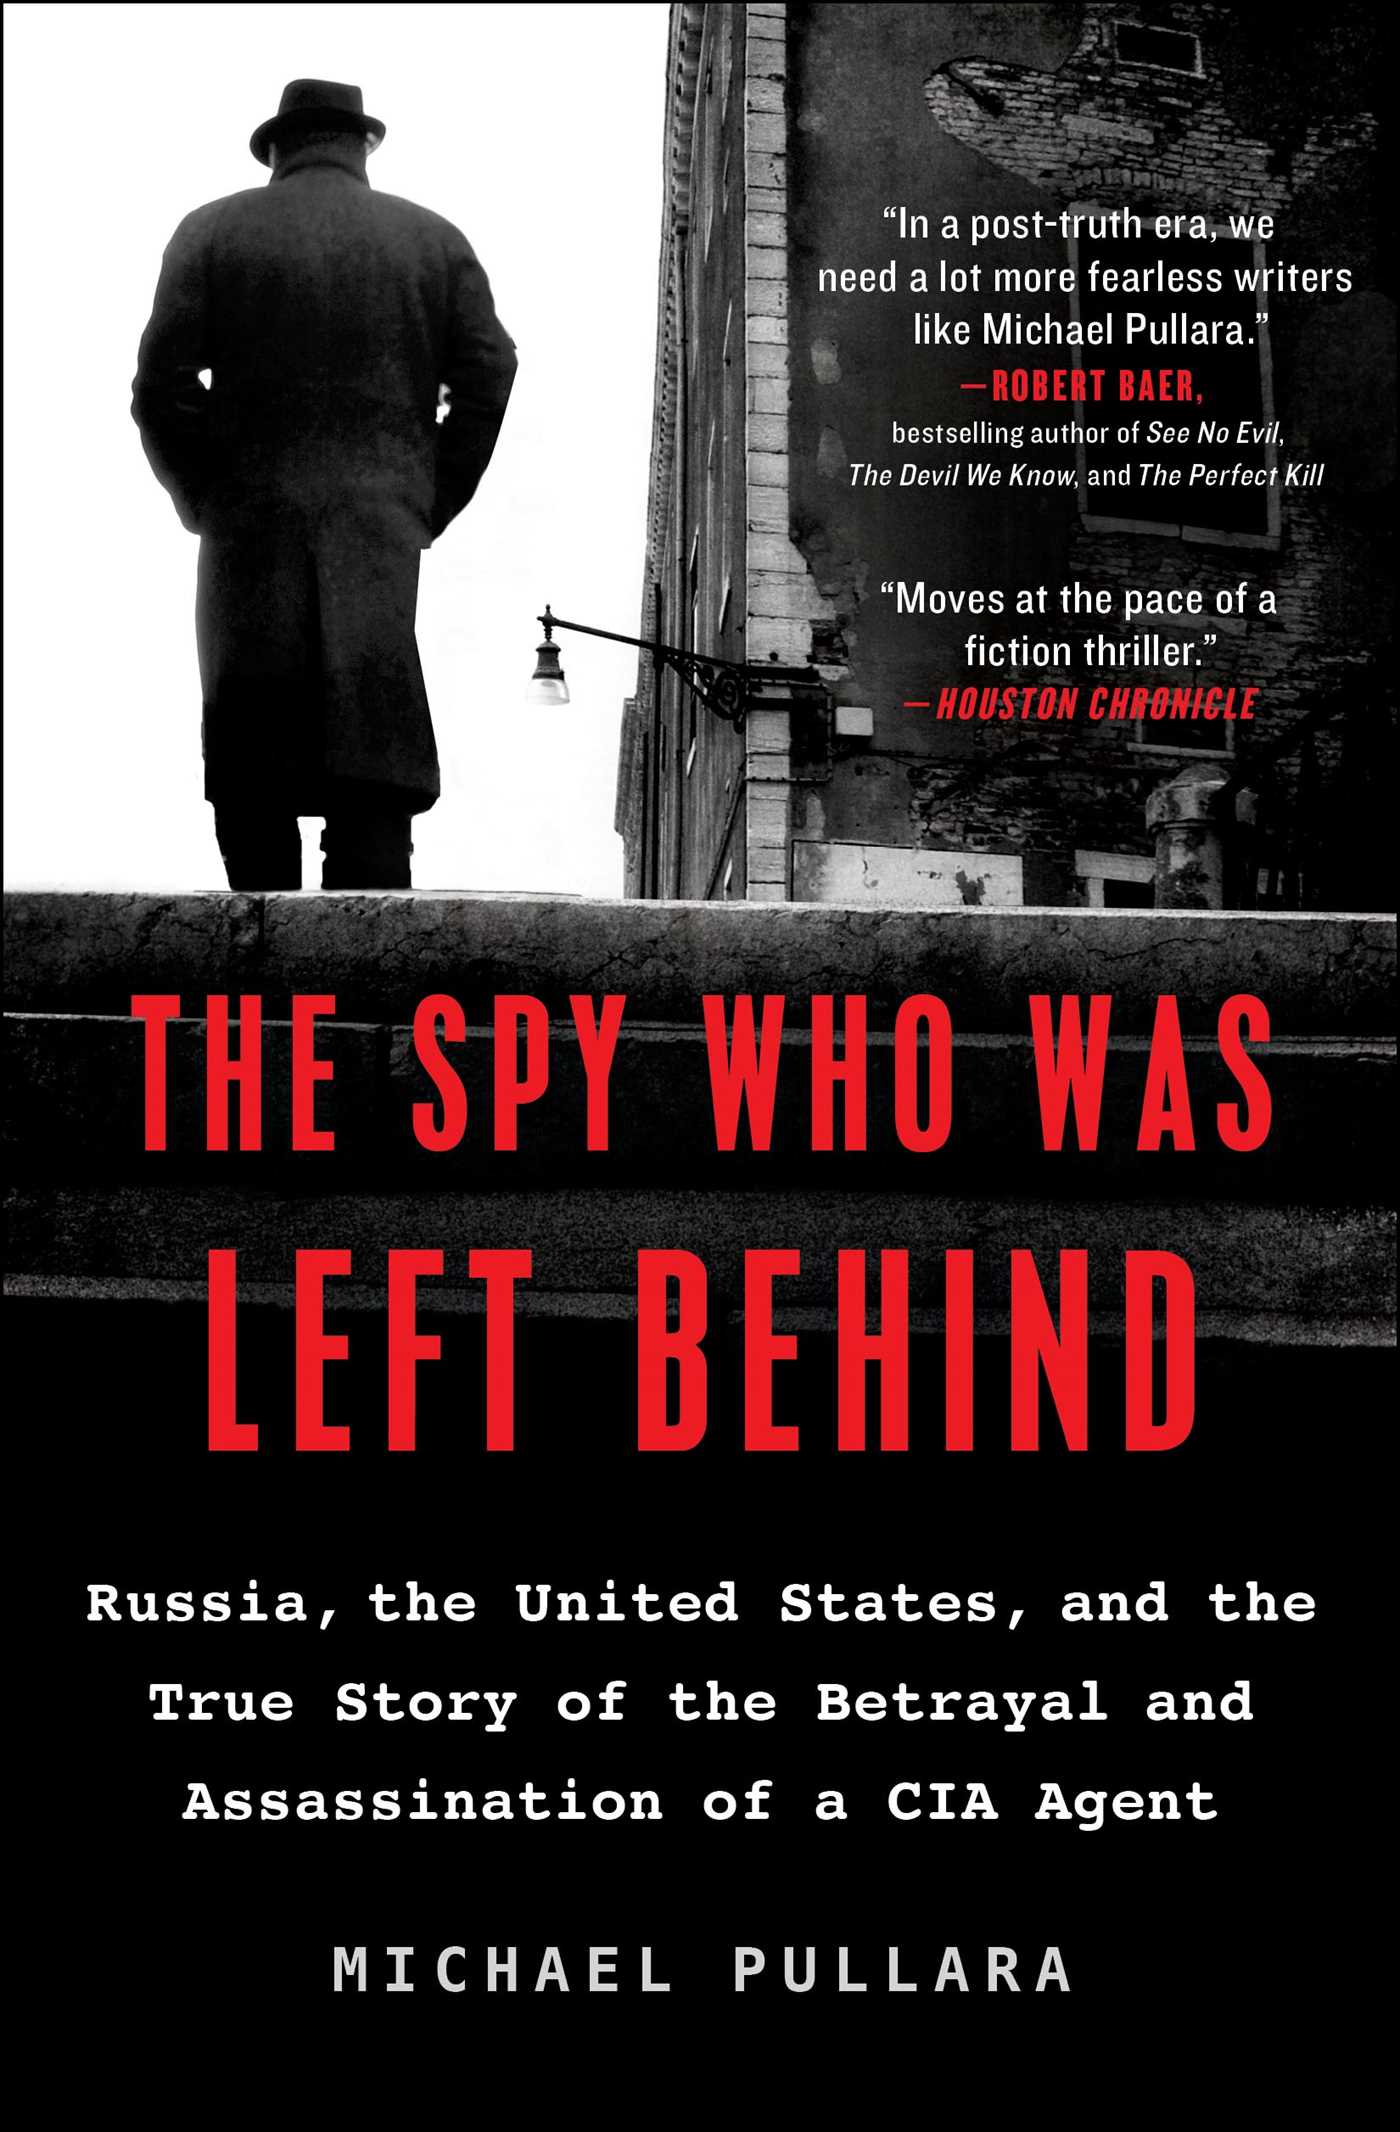 Read Online The Spy Who Was Left Behind: Russia, the United States, and the True Story of the Betrayal and Assassination of a CIA Agent - Michael Pullara file in PDF